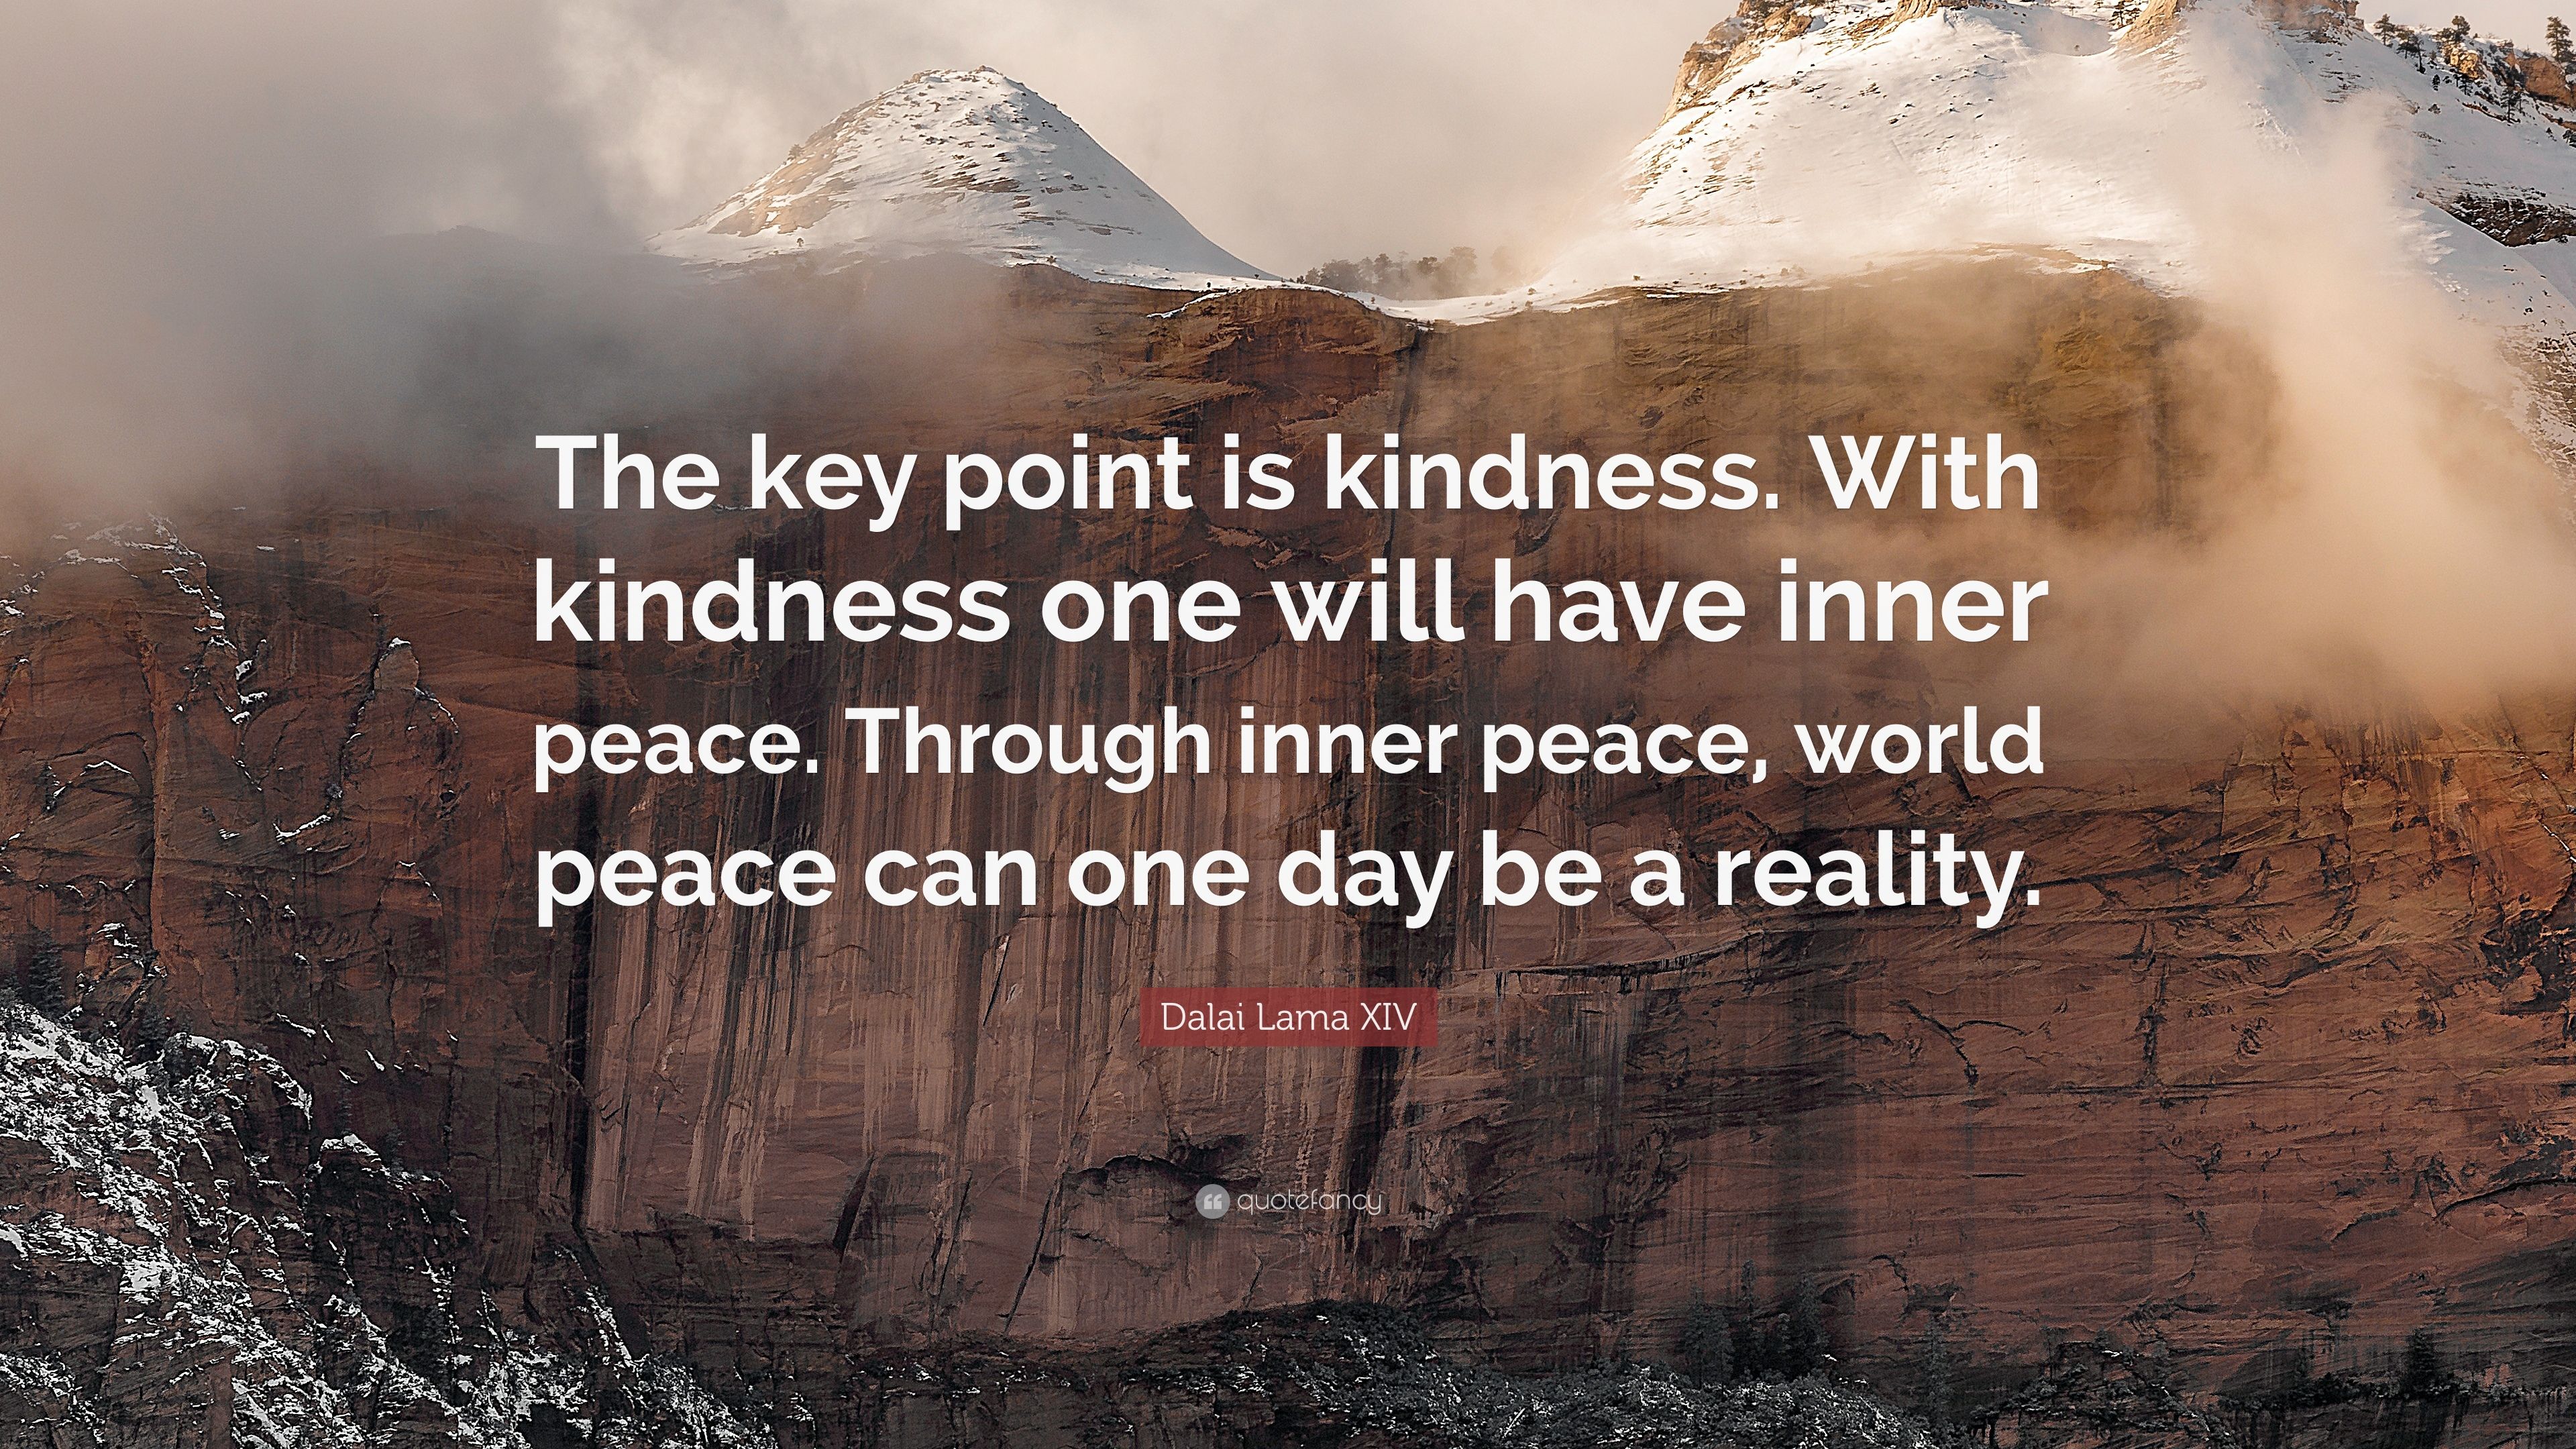 Dalai Lama XIV Quote: “The key point is kindness. With kindness